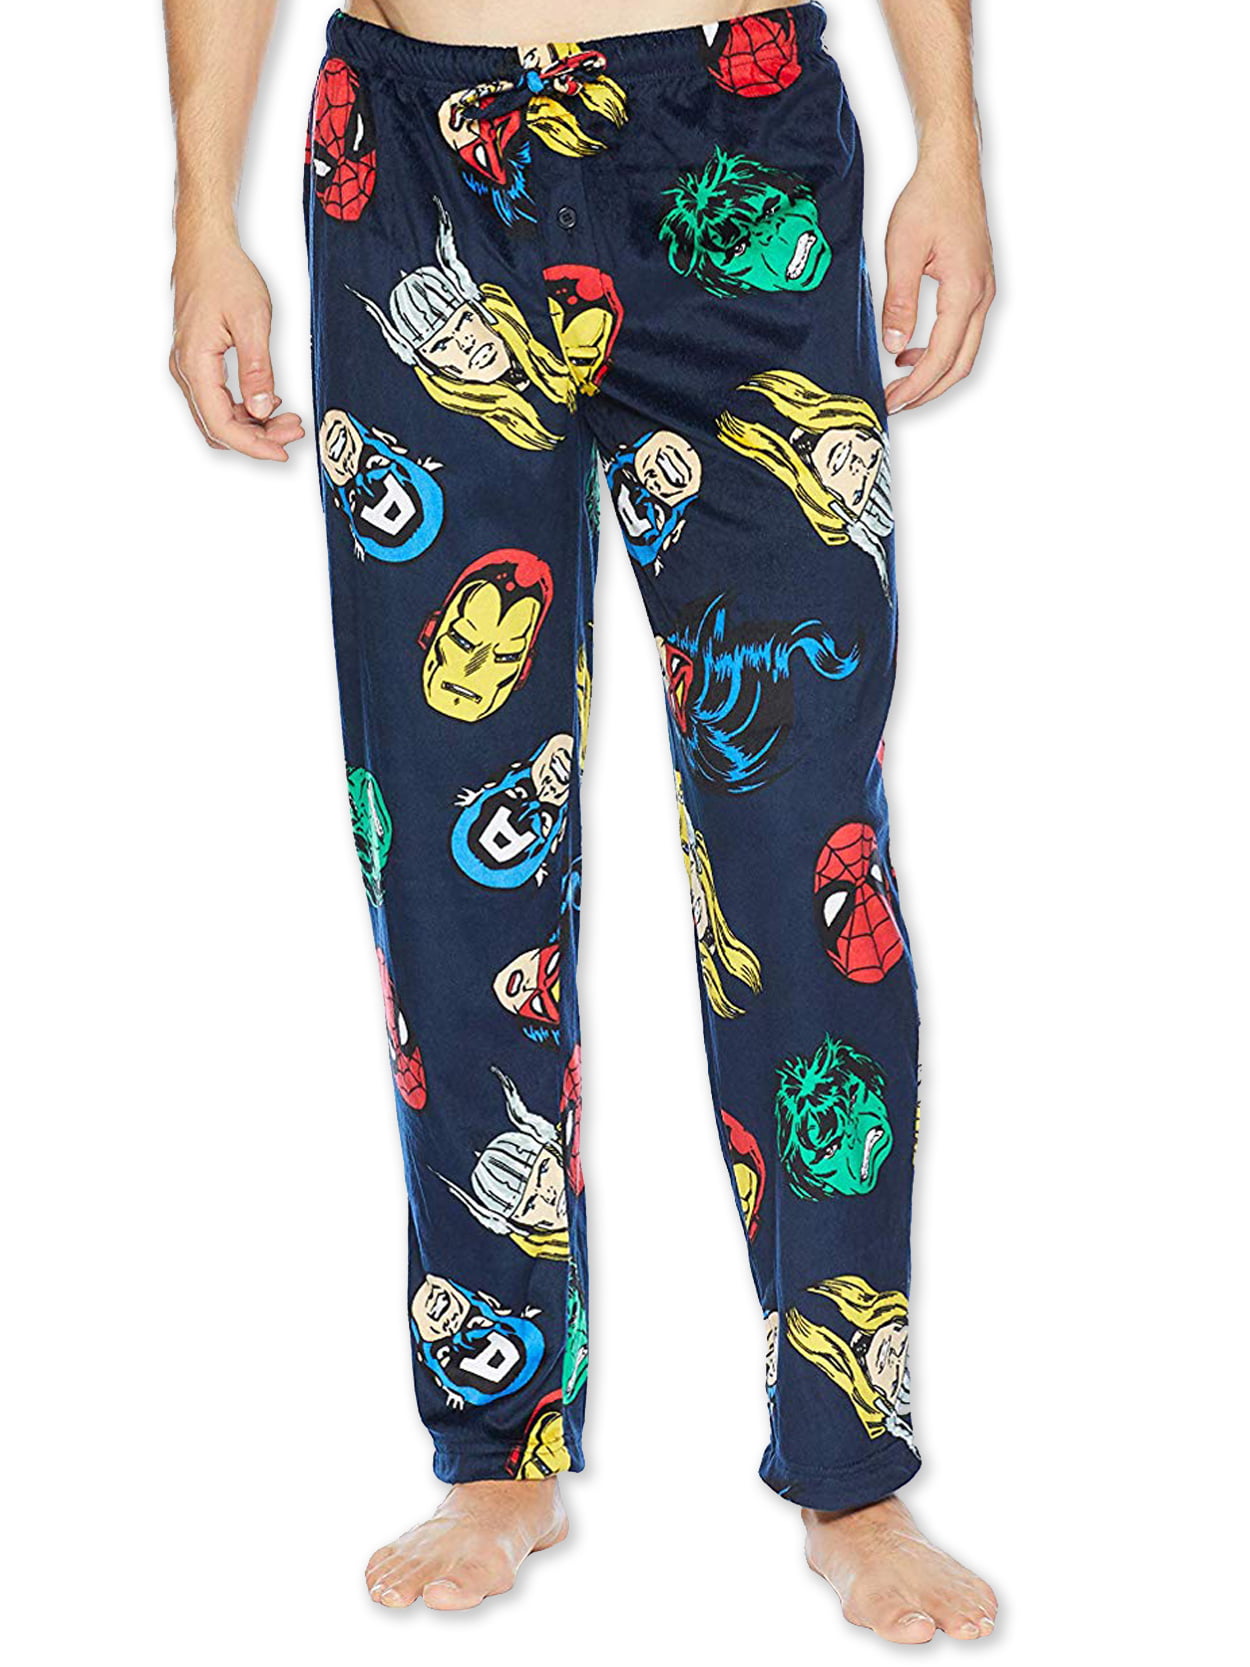 SMALL up to XL RRP £14 NEW MEN'S EX-STORE MARVEL LOUNGE PANTS PJ BOTTOMS SIZES 